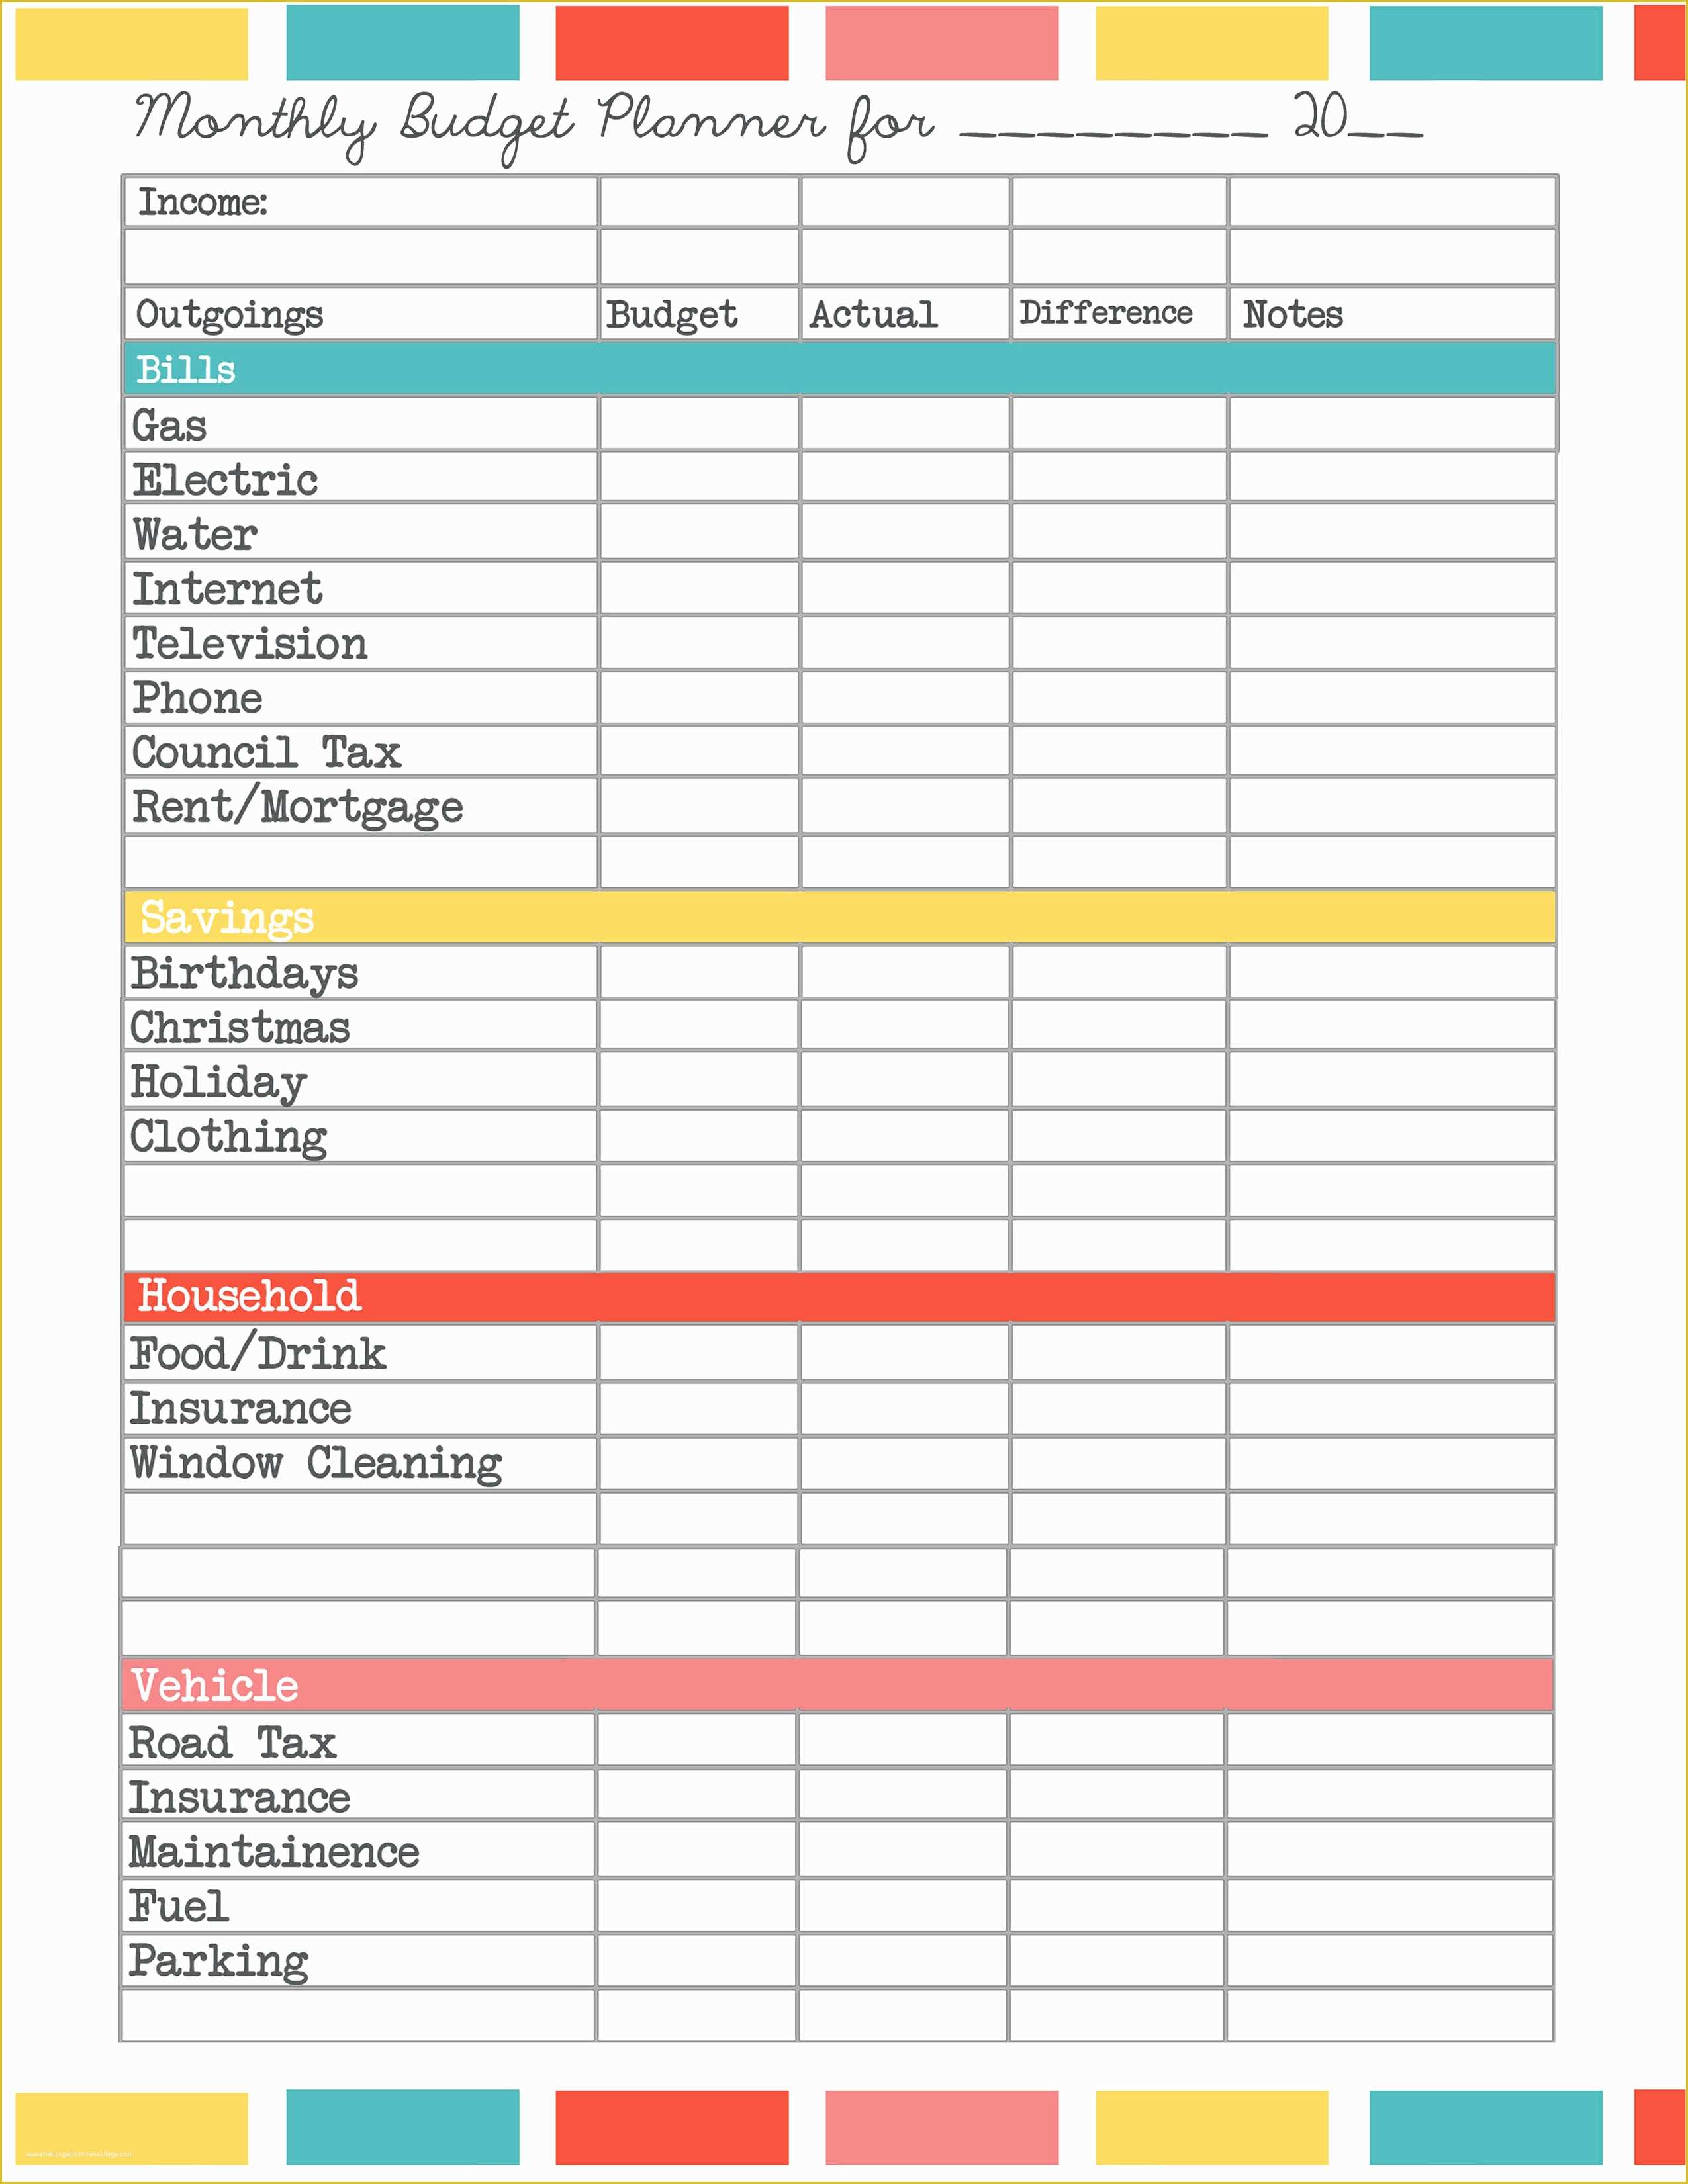 Yearly Budget Planner Template Free Of Free Blank Printable Bud Worksheets Best Photos Of